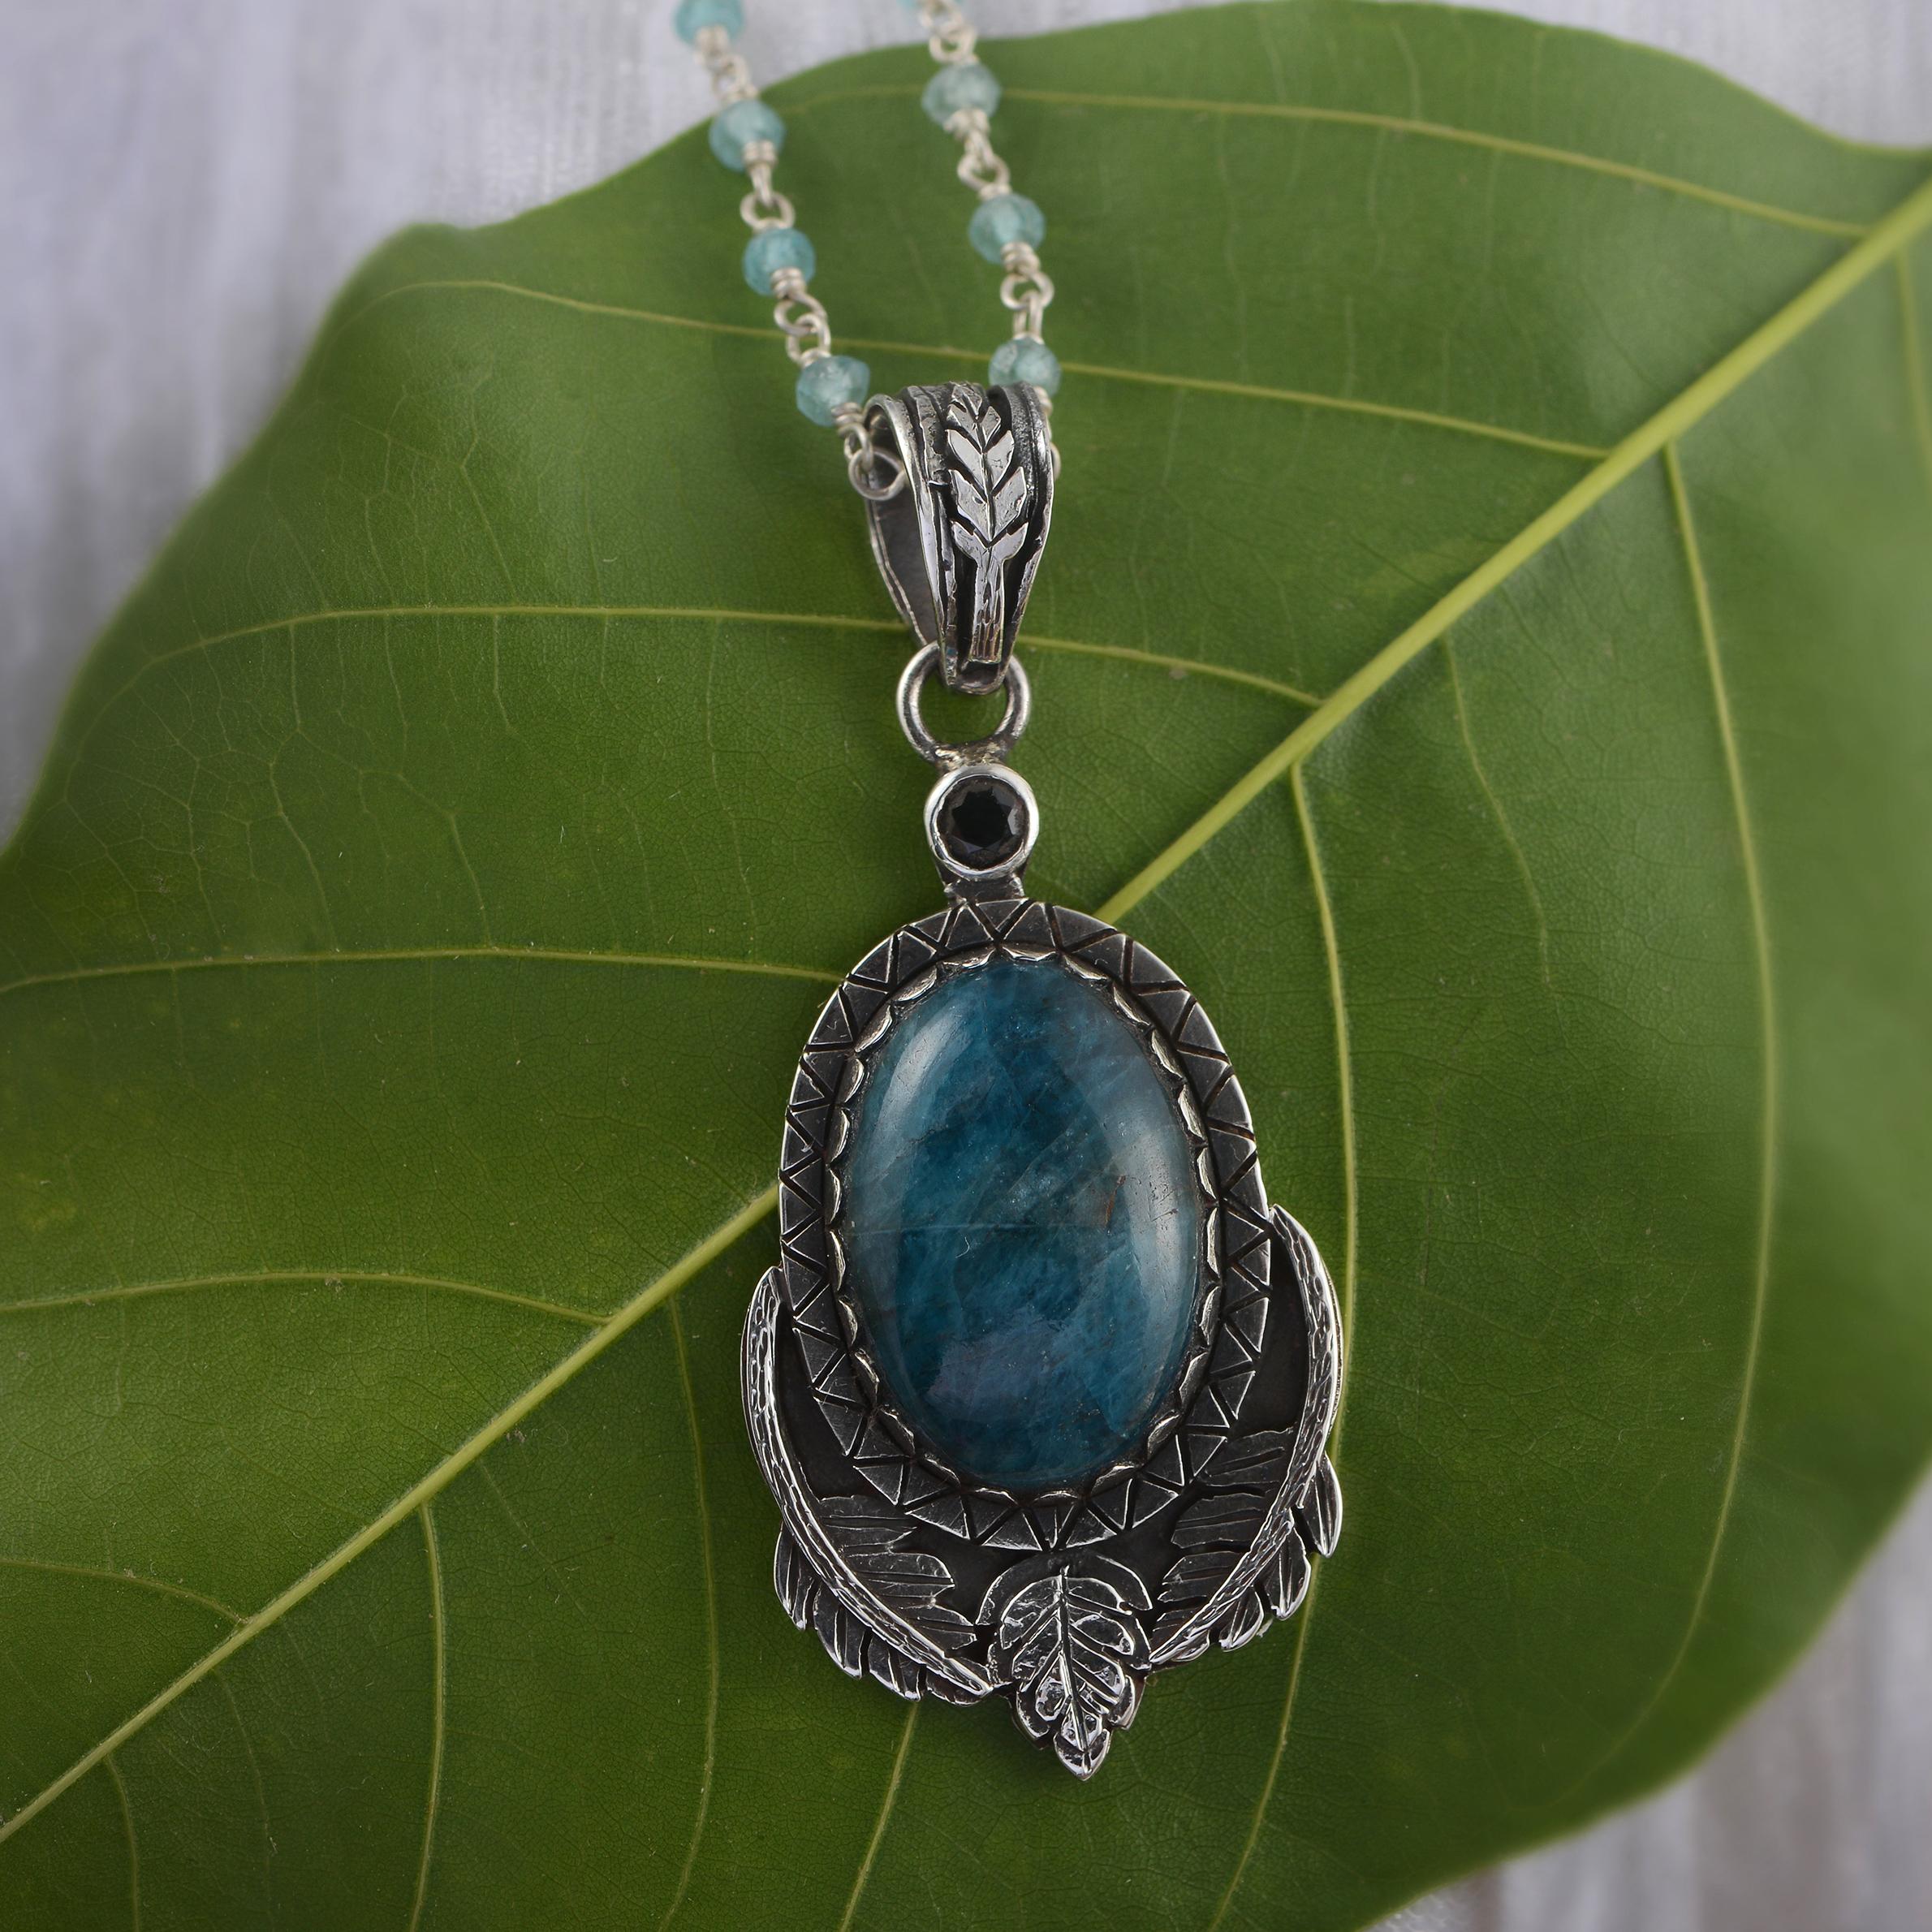 This lovely one of a kind  Apatite Sapphire Silver Pendant has been handmade in our workshops.

It features a large cabochon apatite which is capped with a blue sapphire. The pendant is made of oxidized sterling silver which has been hand engraved